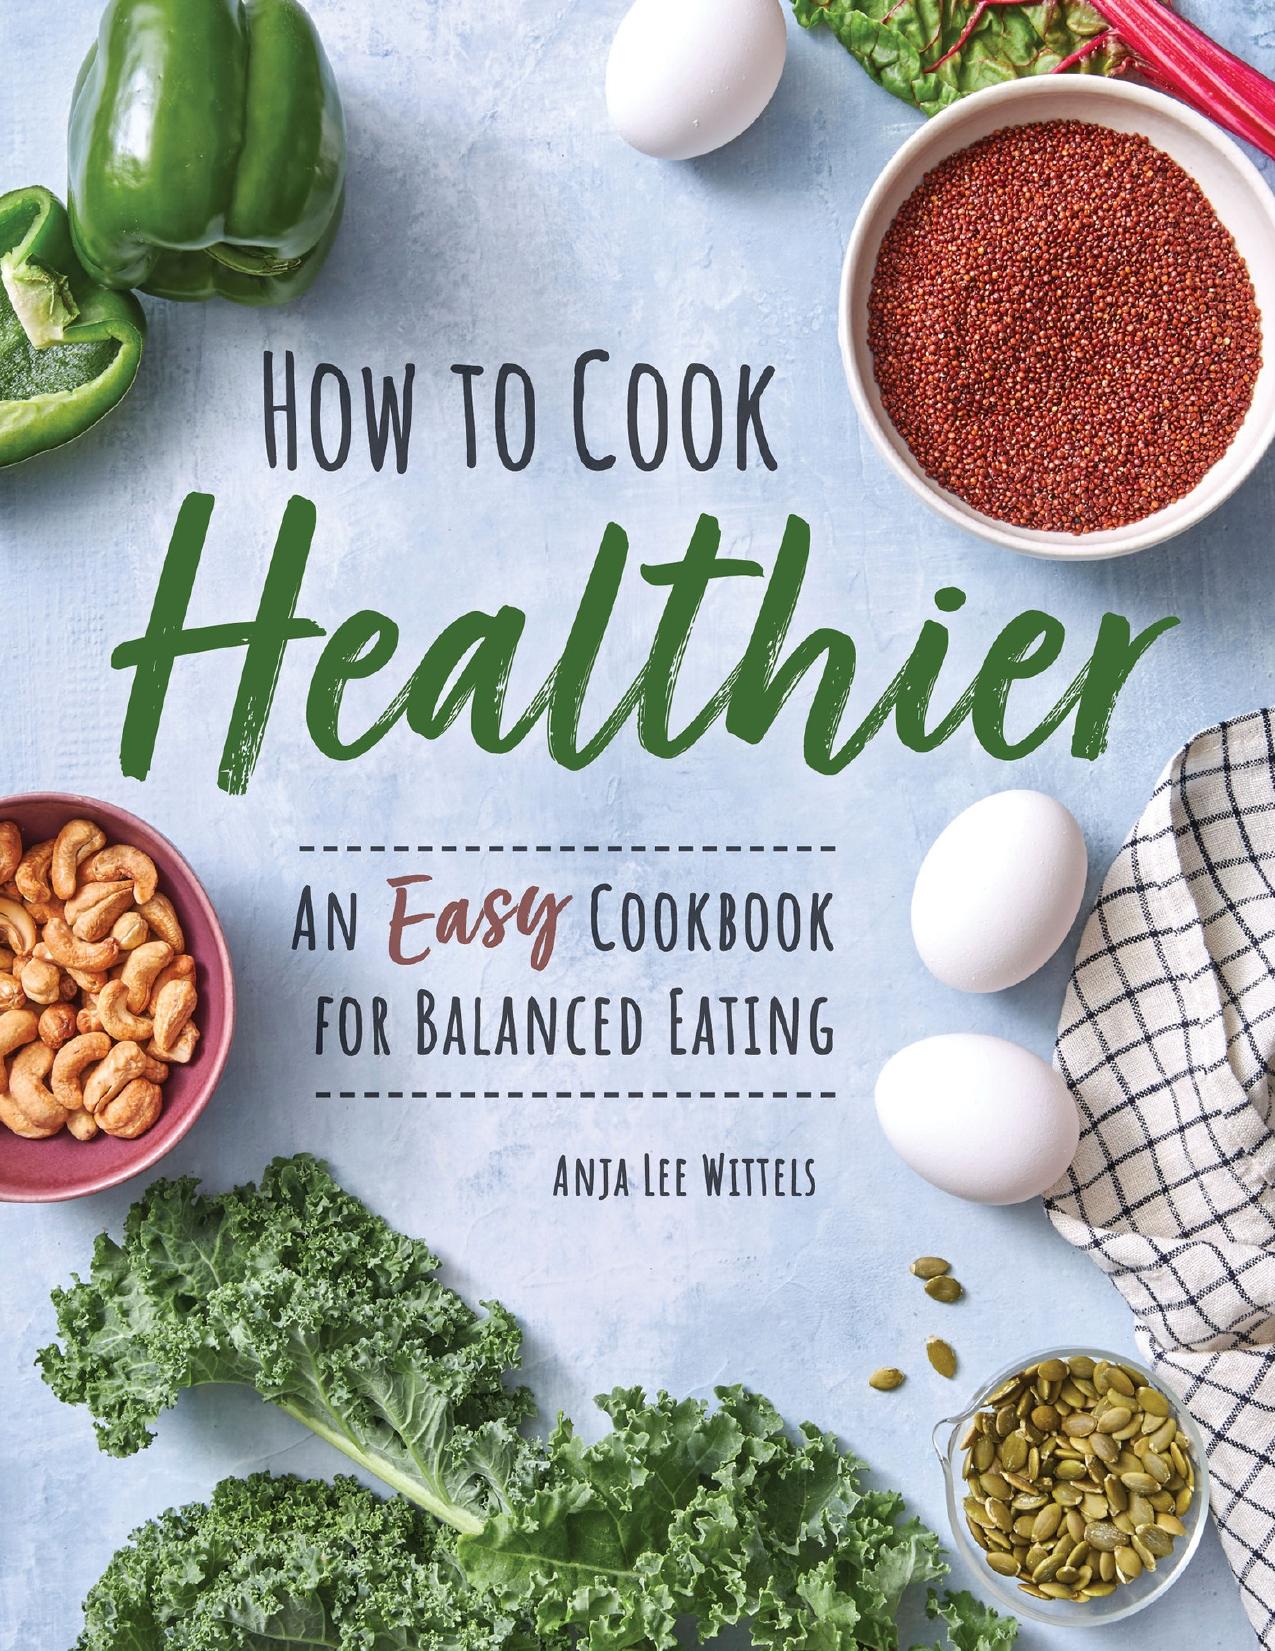 How to Cook Healthier: An Easy Cookbook for Balanced Eating by Wittels Anja Lee